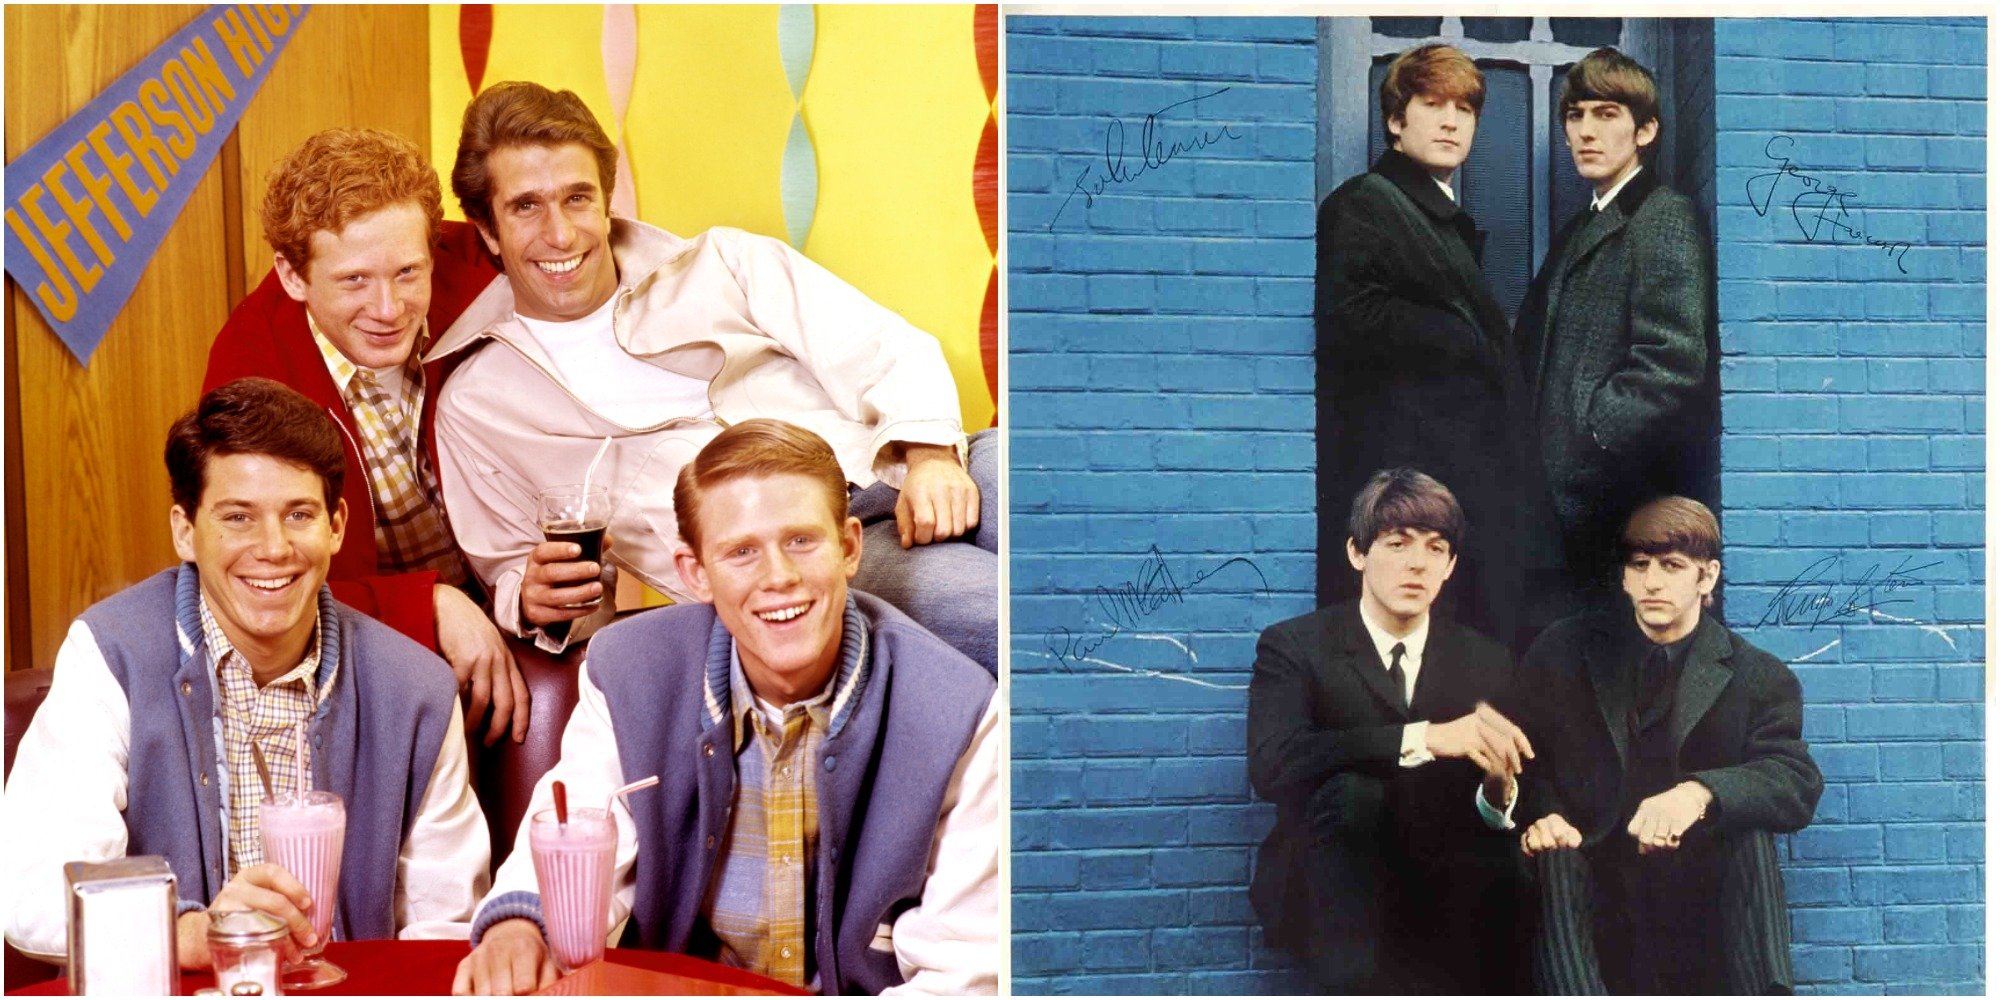 Members of the "Happy Days" cast were shocked when they learned this Beatles legend was a fan of their show.